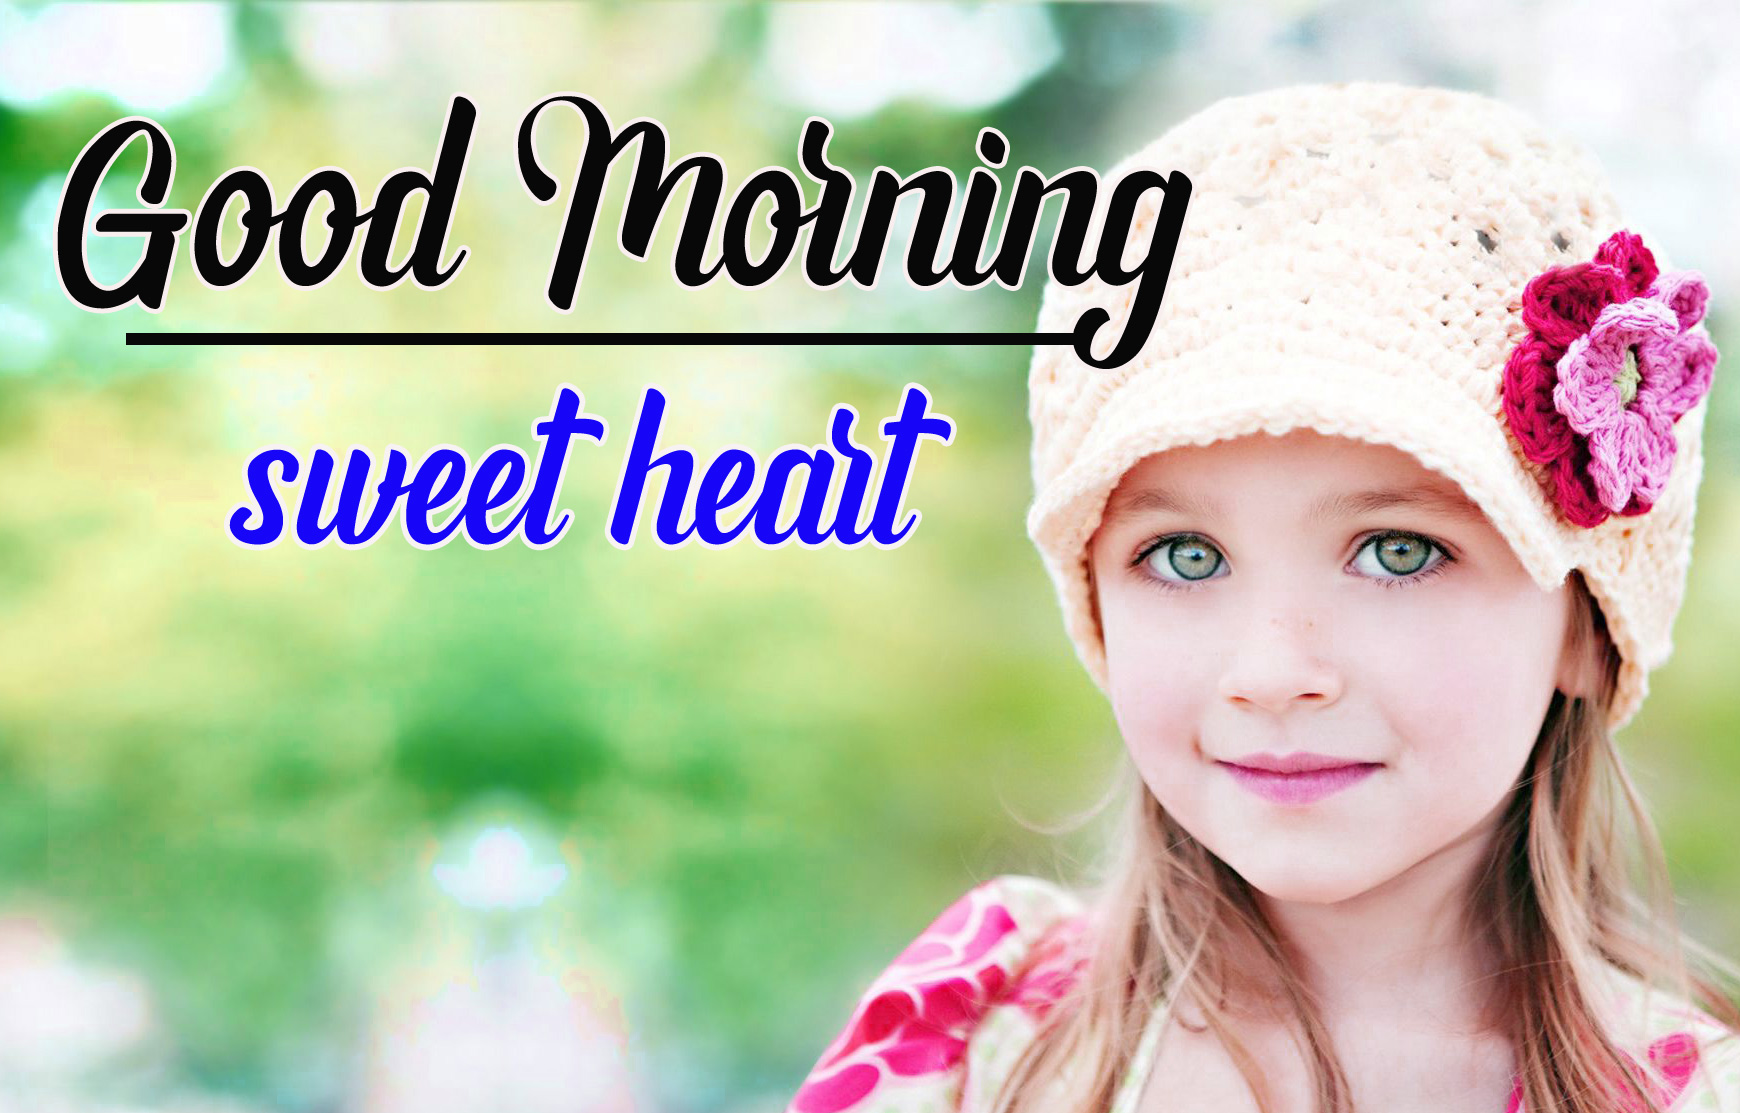 Cute Baby Good Morning Photo Download 